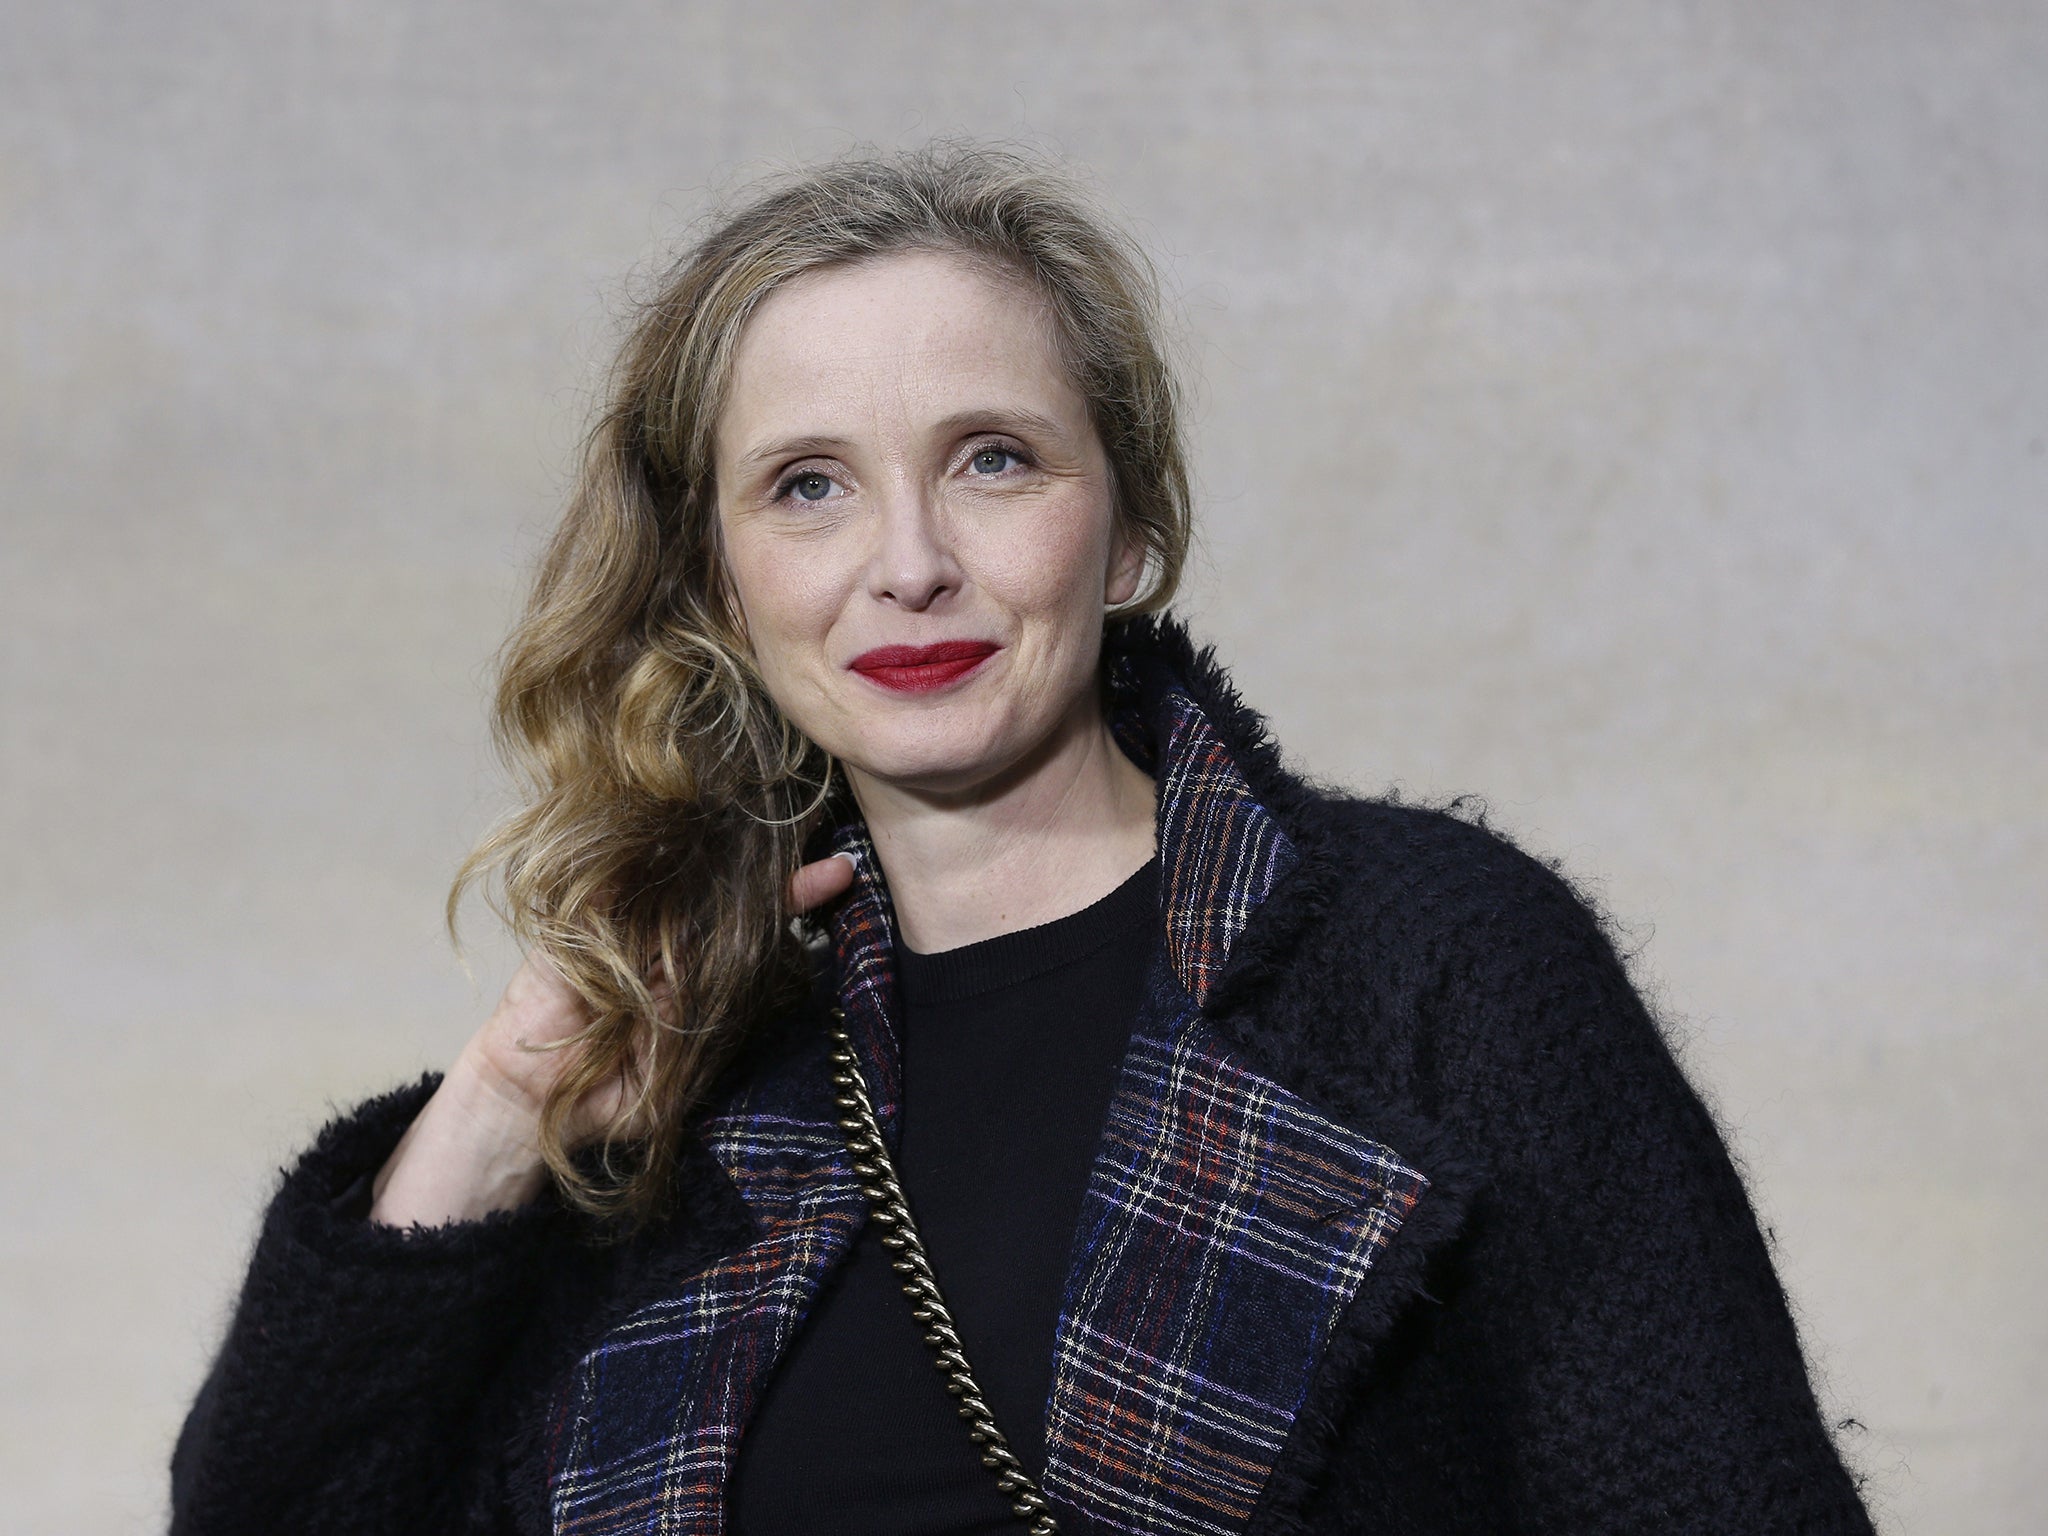 Avengers Age of Ultron star Julie Delpy is the latest French actress